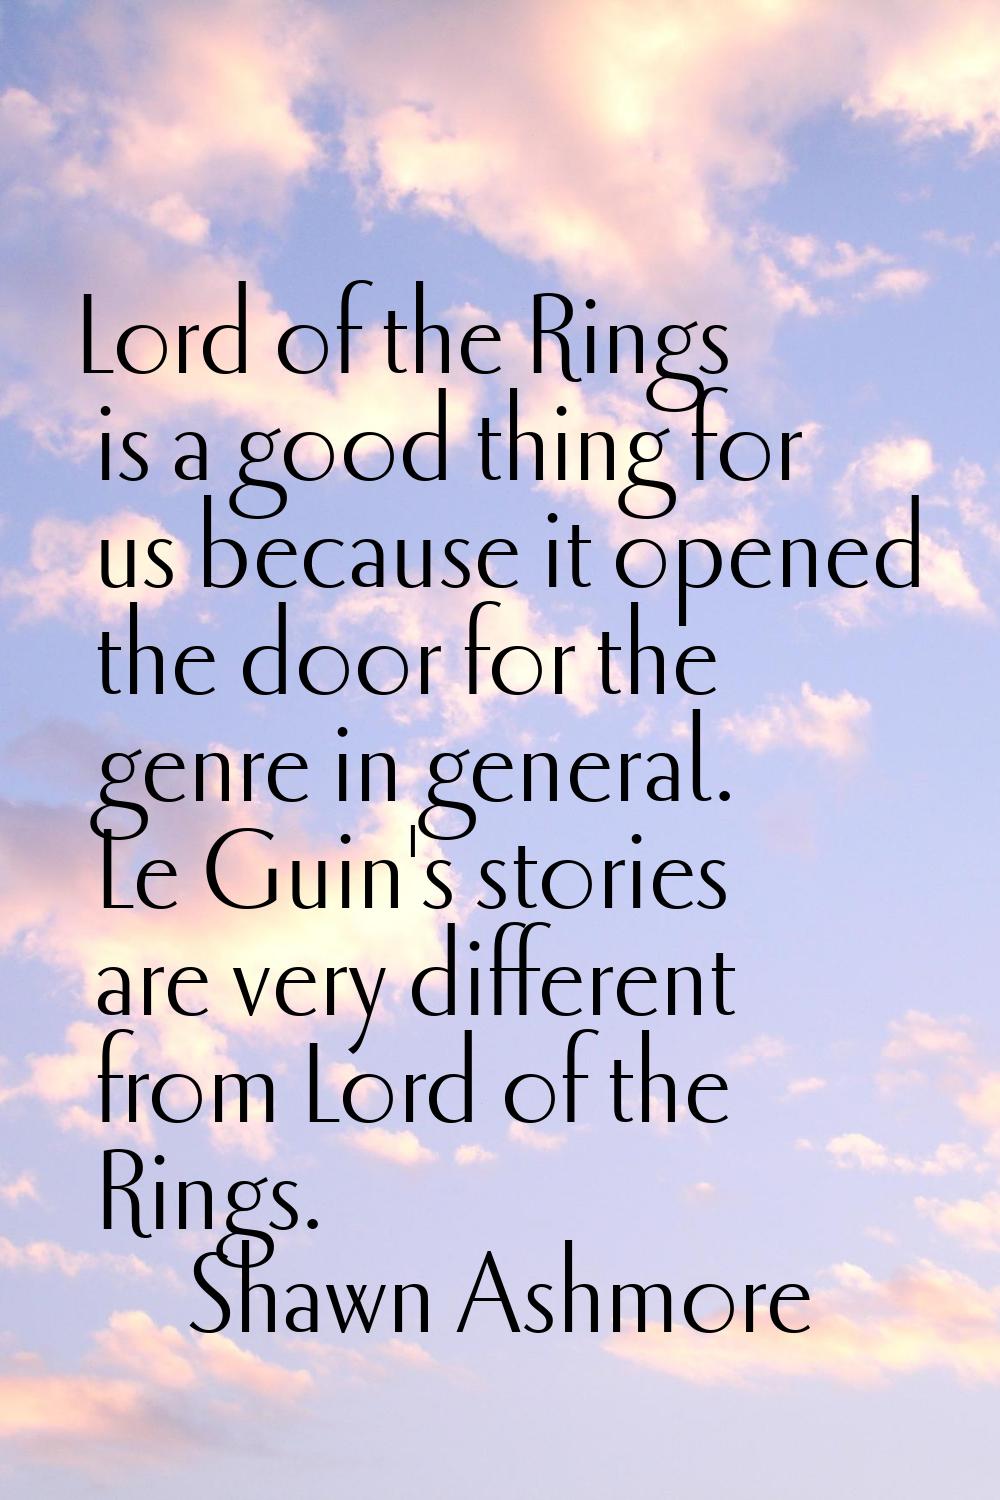 Lord of the Rings is a good thing for us because it opened the door for the genre in general. Le Gu